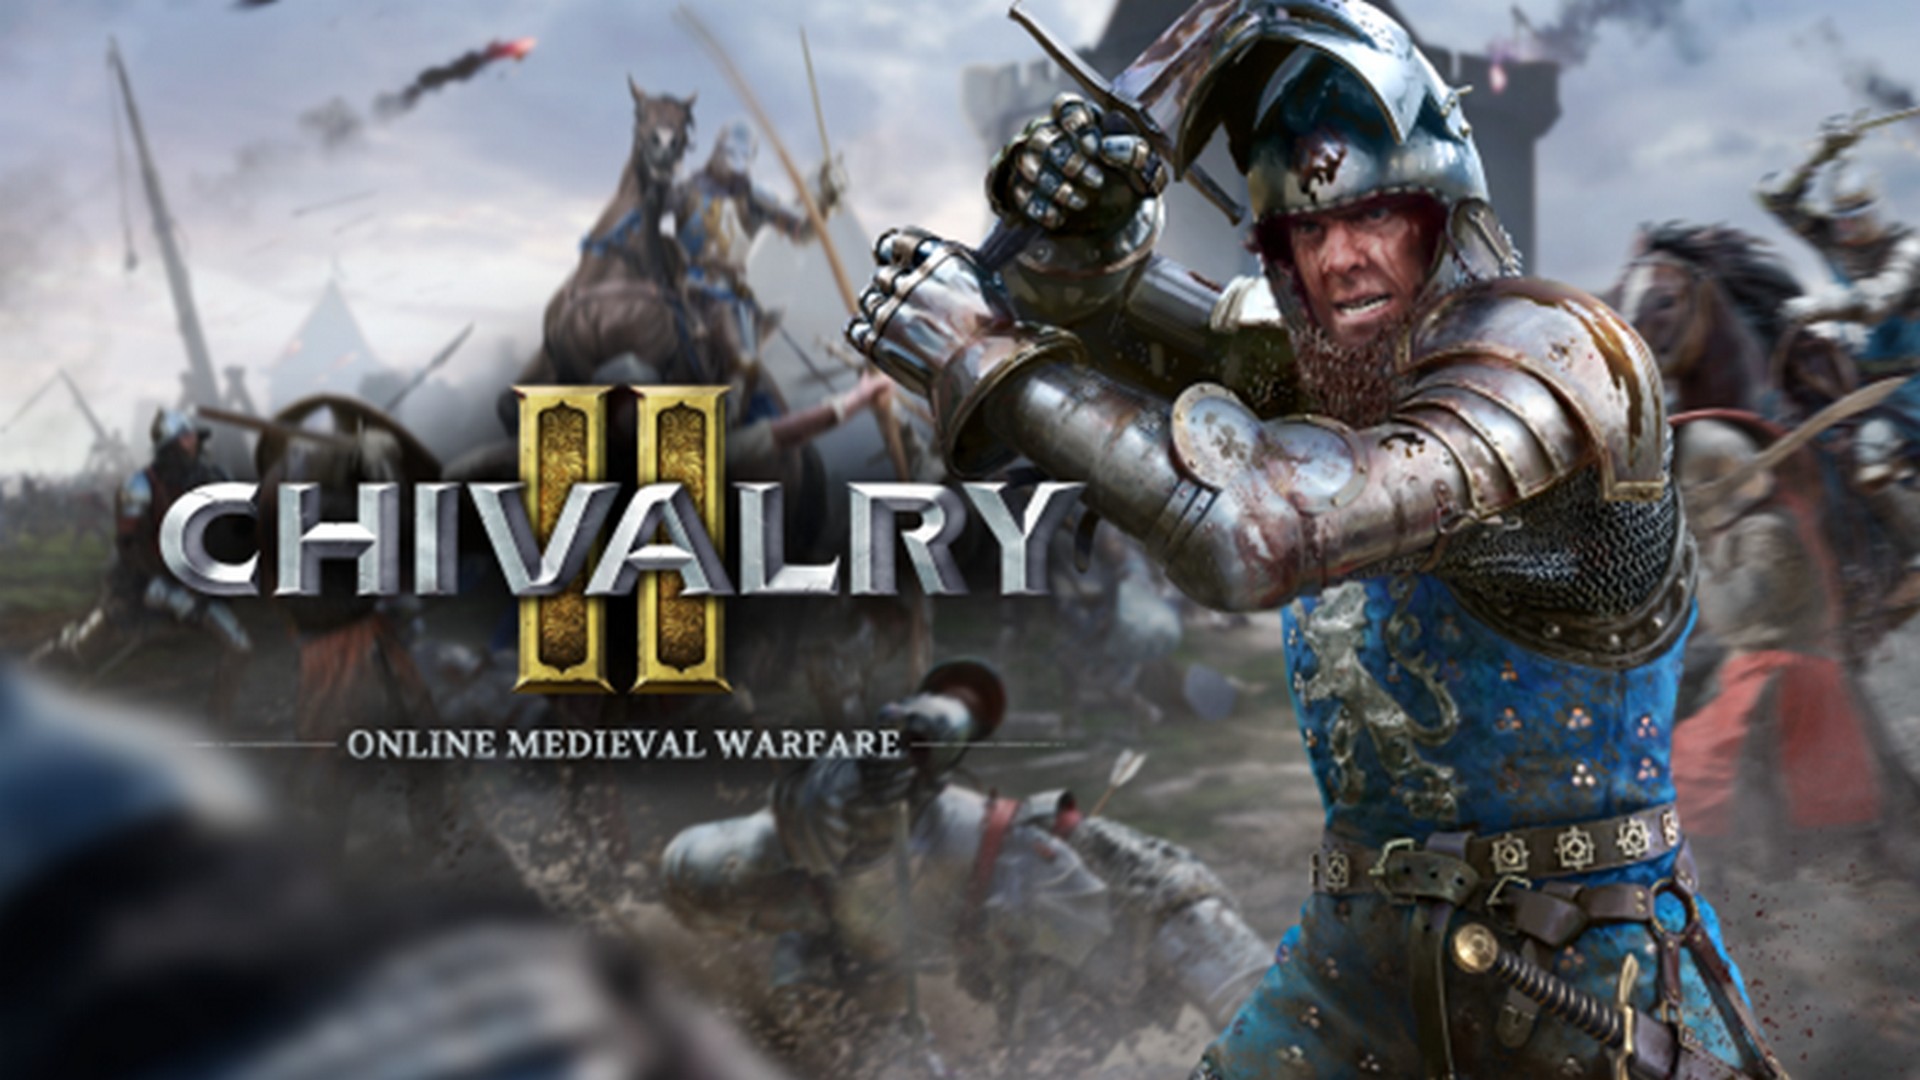 Become A Knight Of Legend In The Epic Multiplayer Warfare Of Chivalry 2, Out Now For PC, PlayStation, and Xbox Console Systems